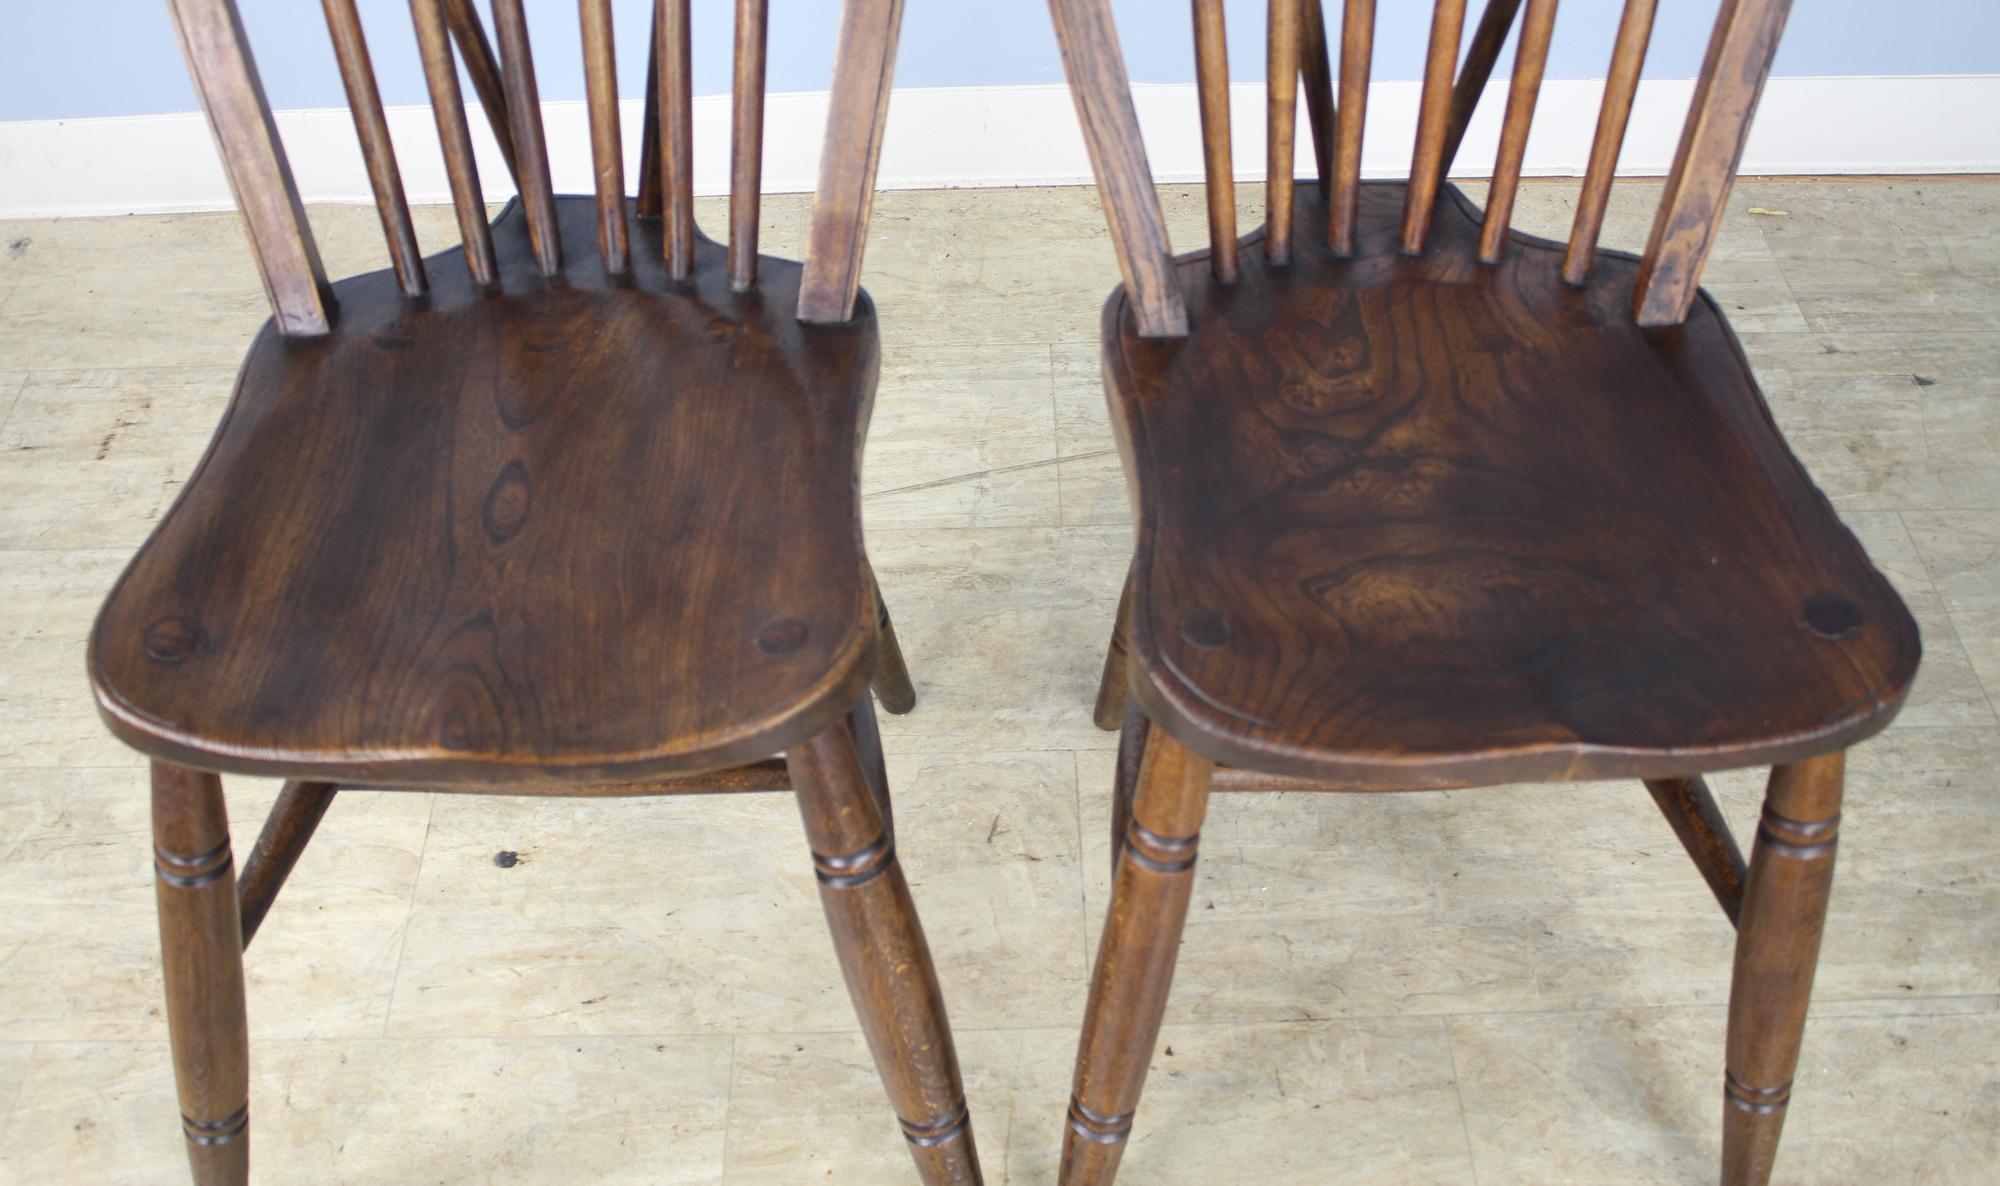 A set of four English elm Windsor chairs in very good antique condition. Although this is a like set, they are handmade, and the legs have slightly different flare, as shown in image #5. These would look wonderful around any number of table styles.